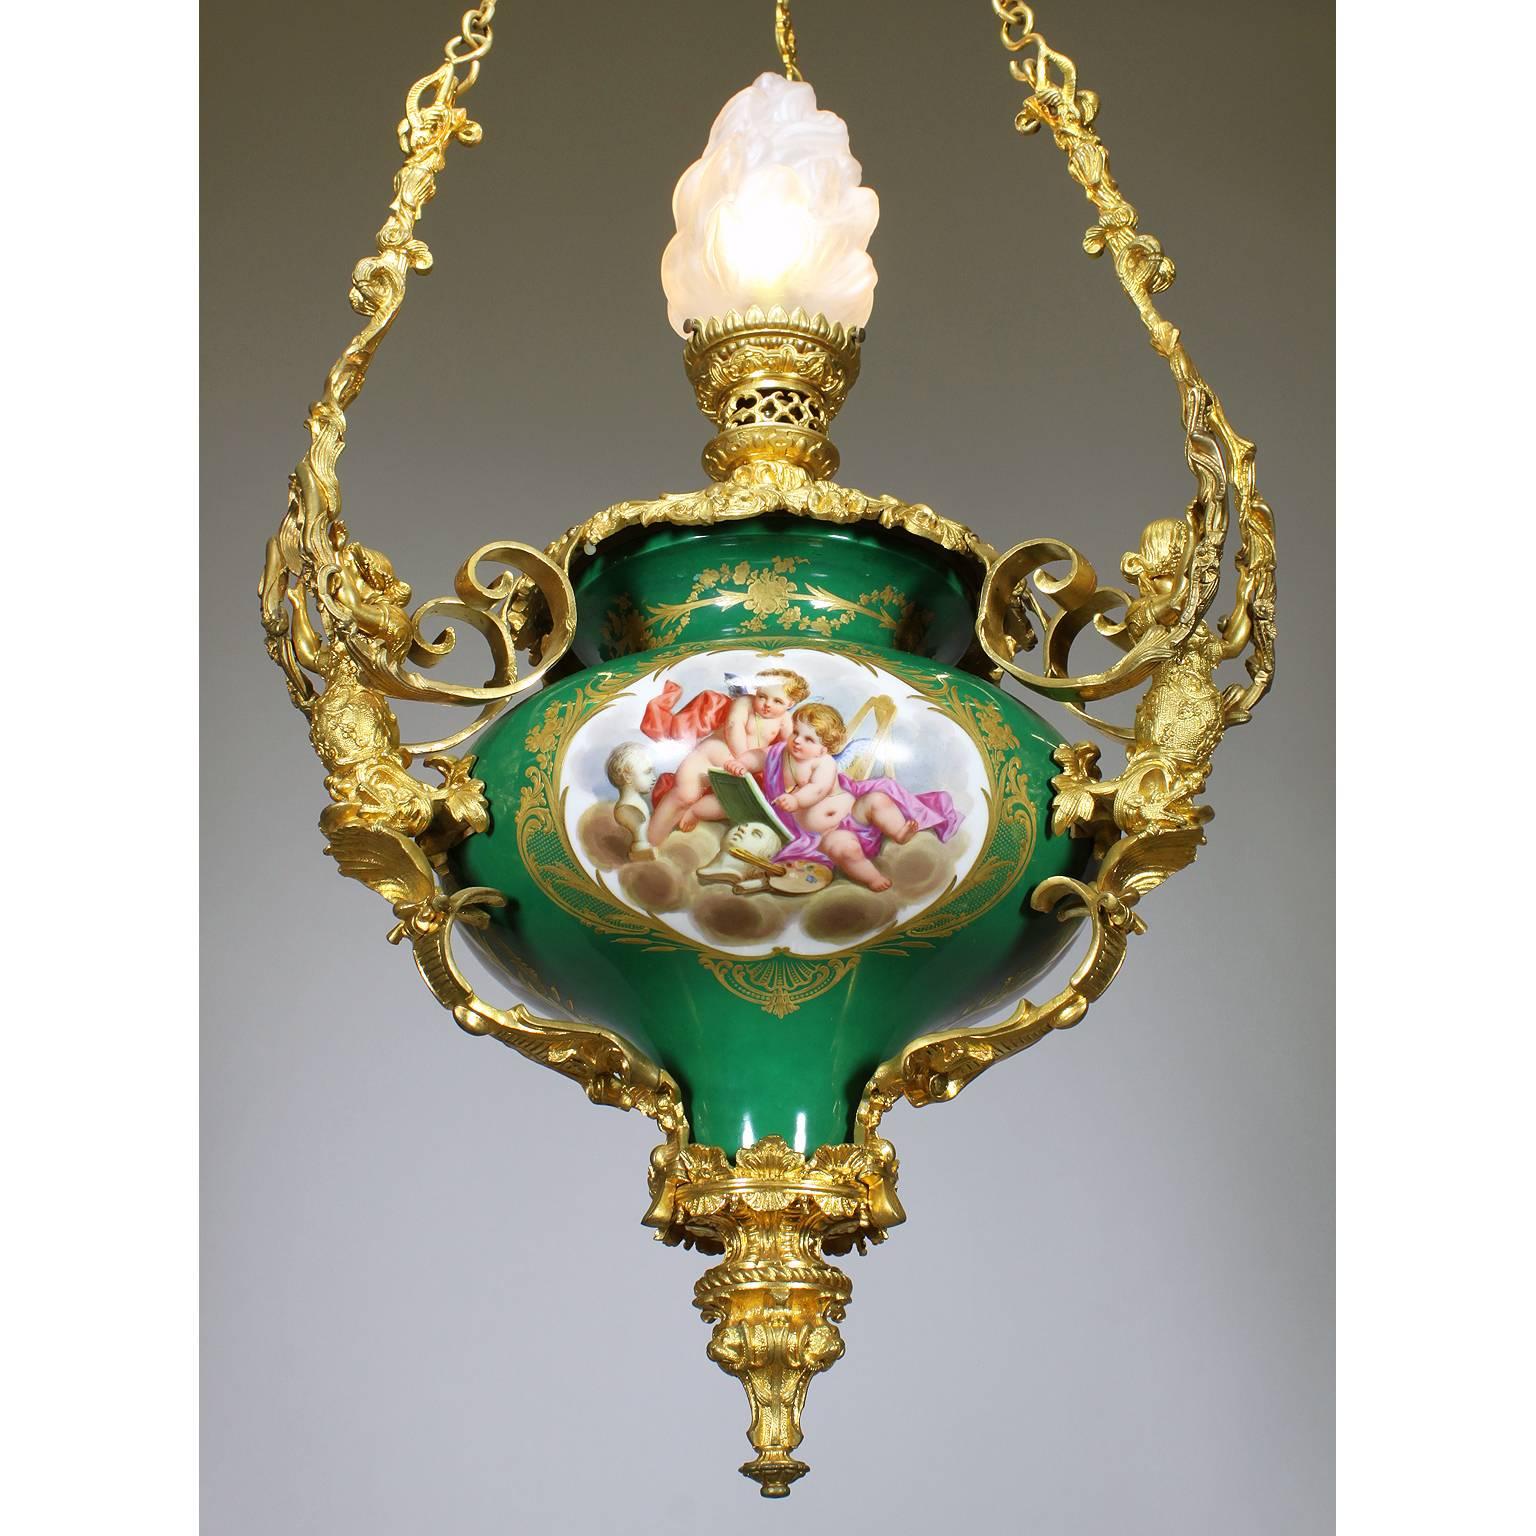 A very fine, French 19th century renaissance revival style figural porcelain and ormolu-mounted hanging single light lantern, previously an oil lantern. The ovoid green porcelain reservoir, probably by the Royal French Factory of Sevres, with